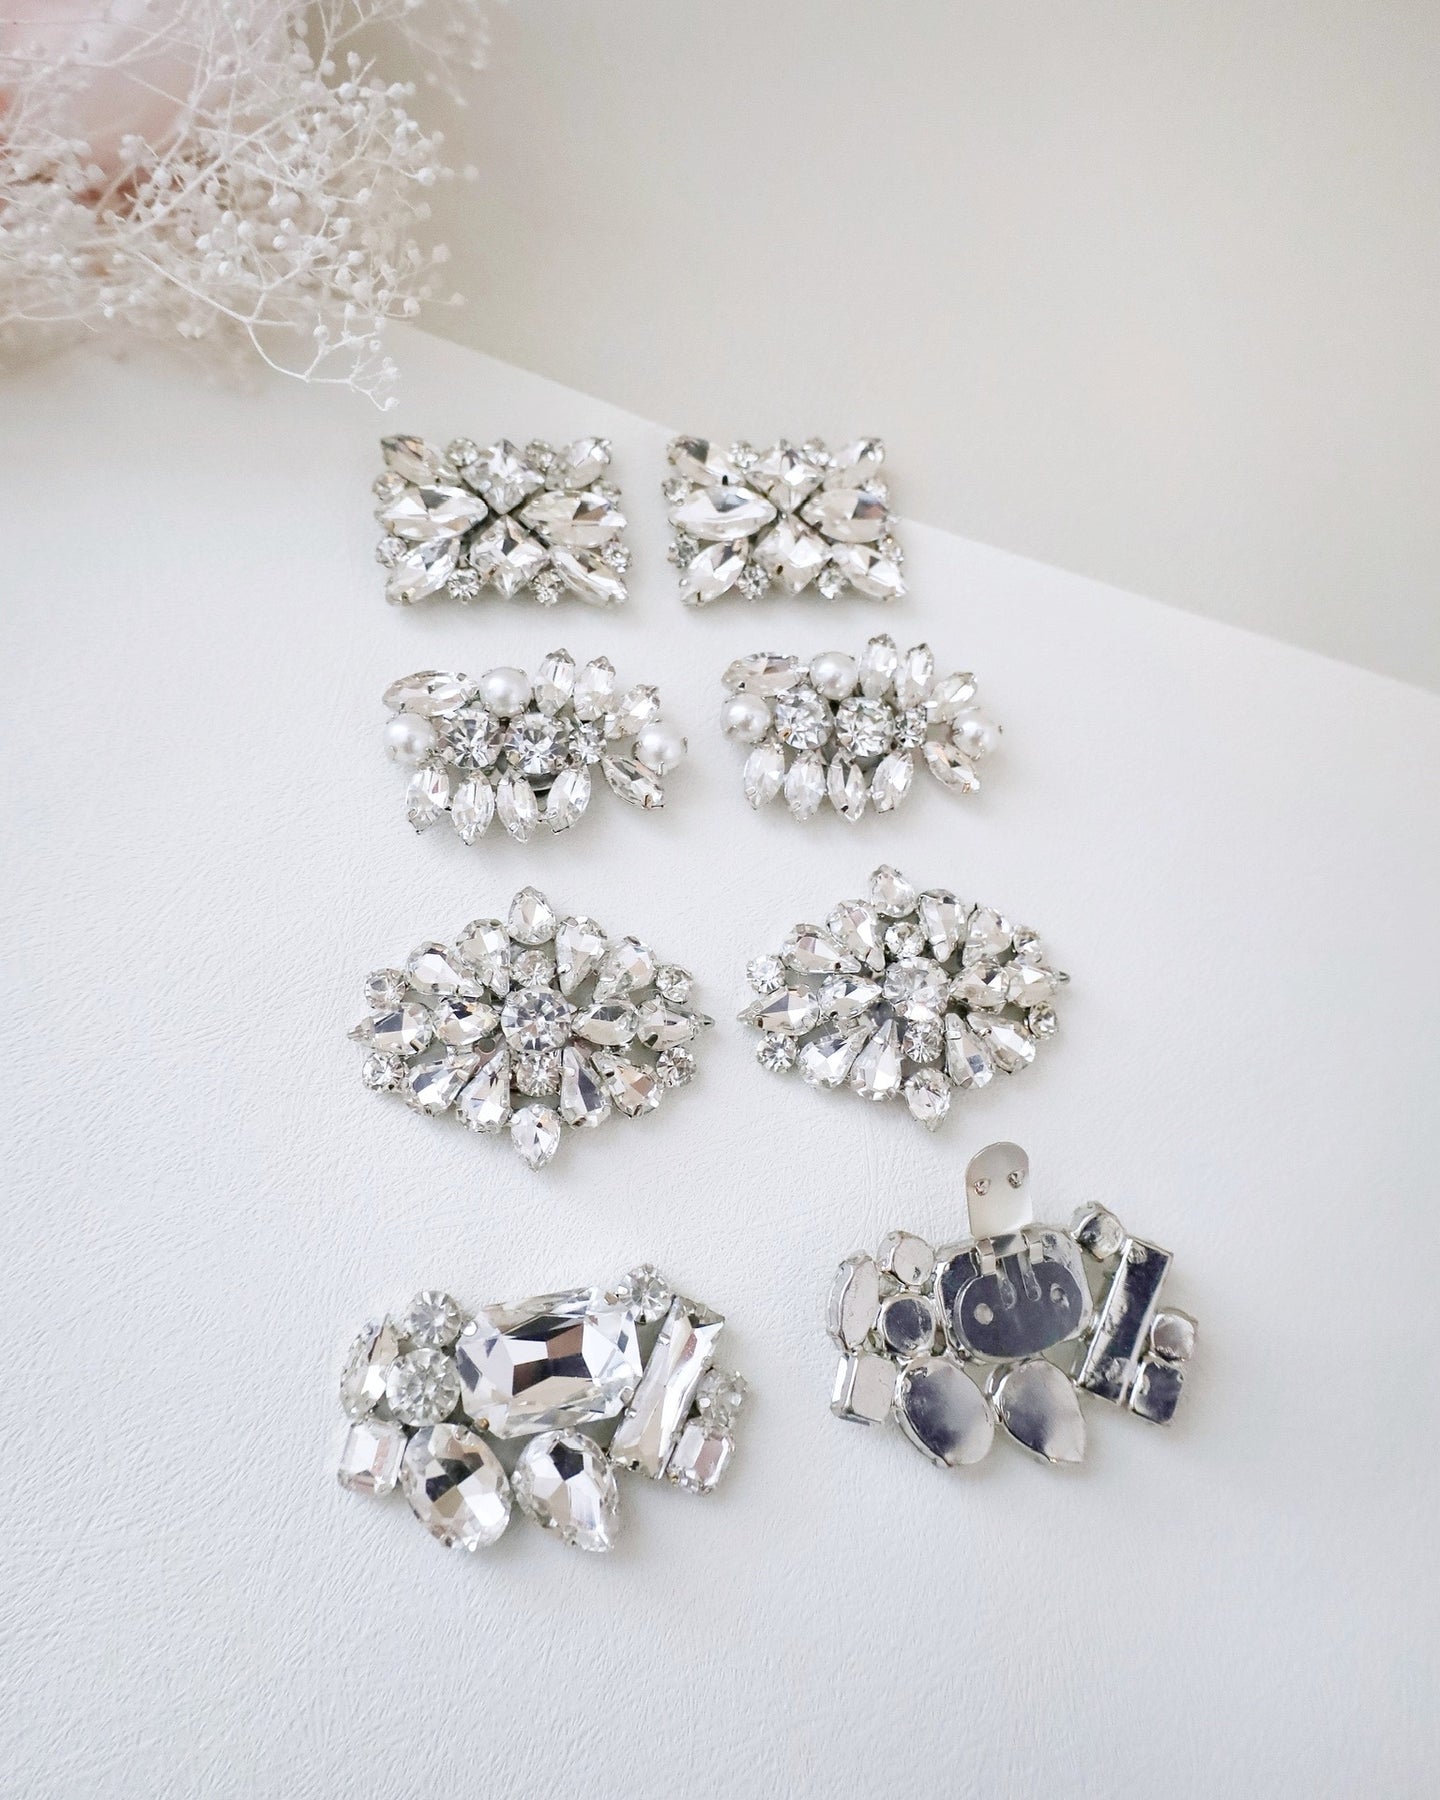 Jeweled Metal Shoe Clips, Bridal Accessories, Bridesmaids Gift, Bride ...